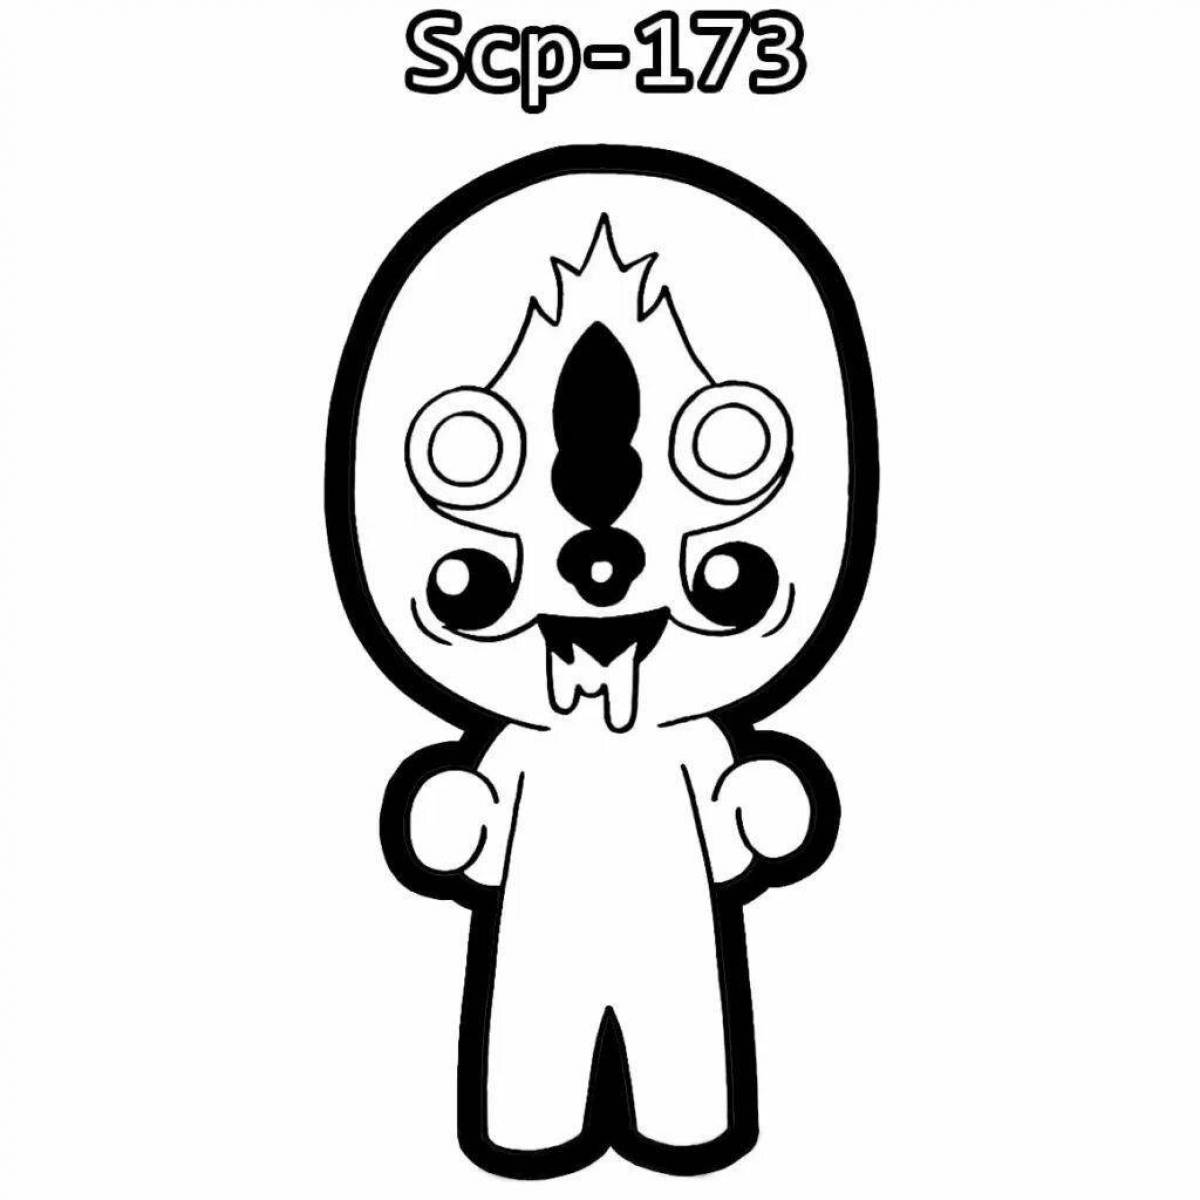 096 scp #2